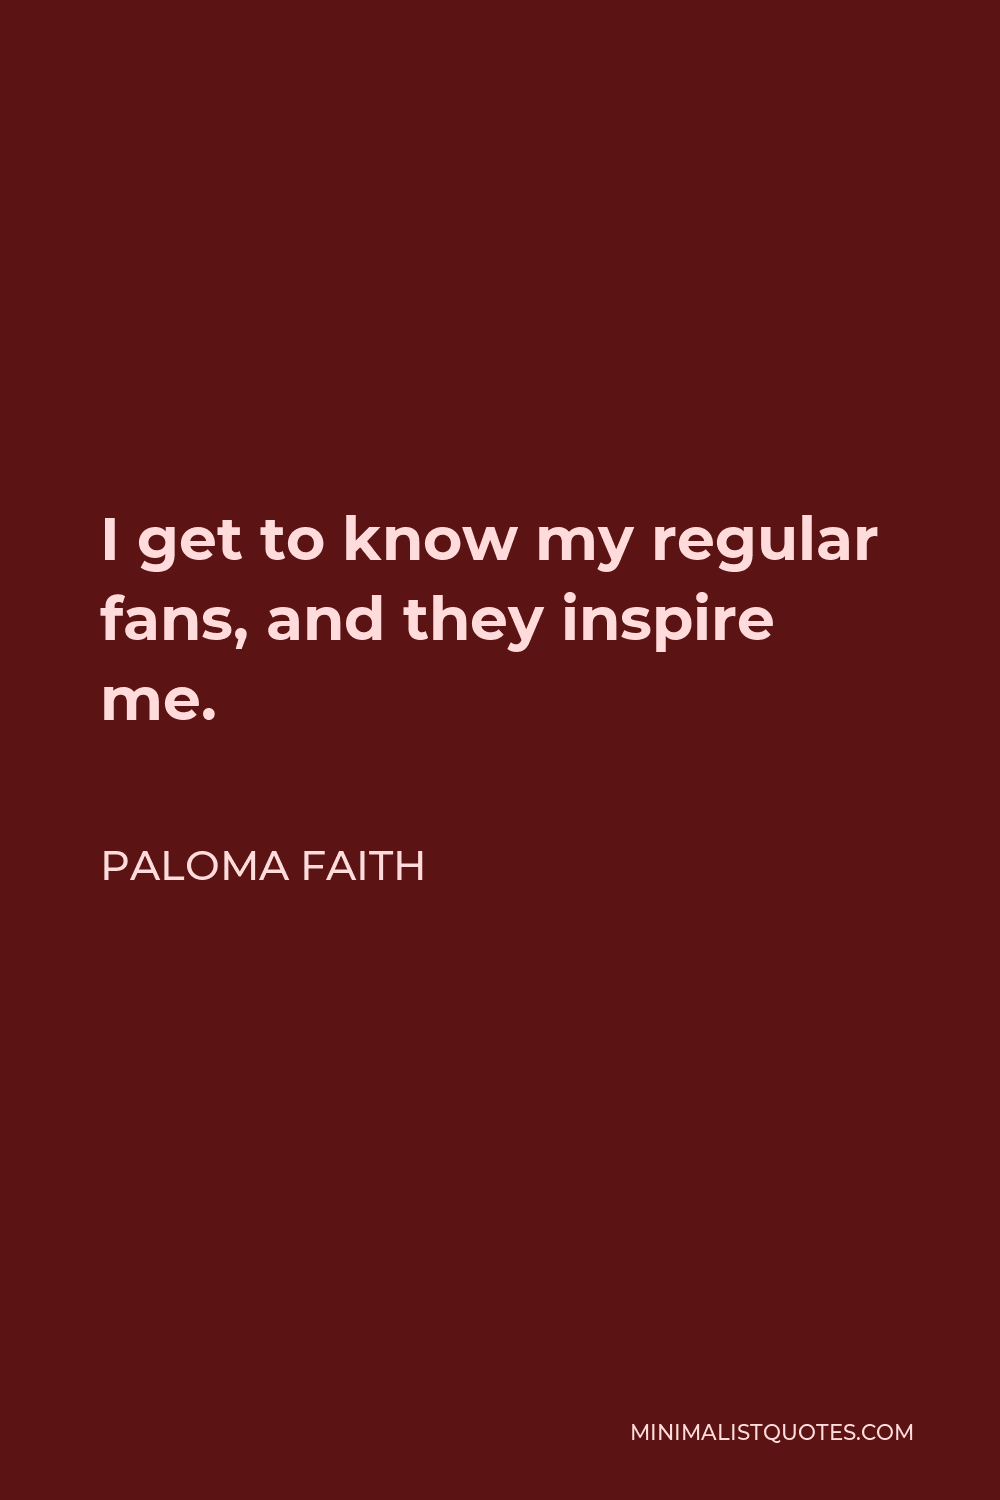 Paloma Faith Quote - I get to know my regular fans, and they inspire me.